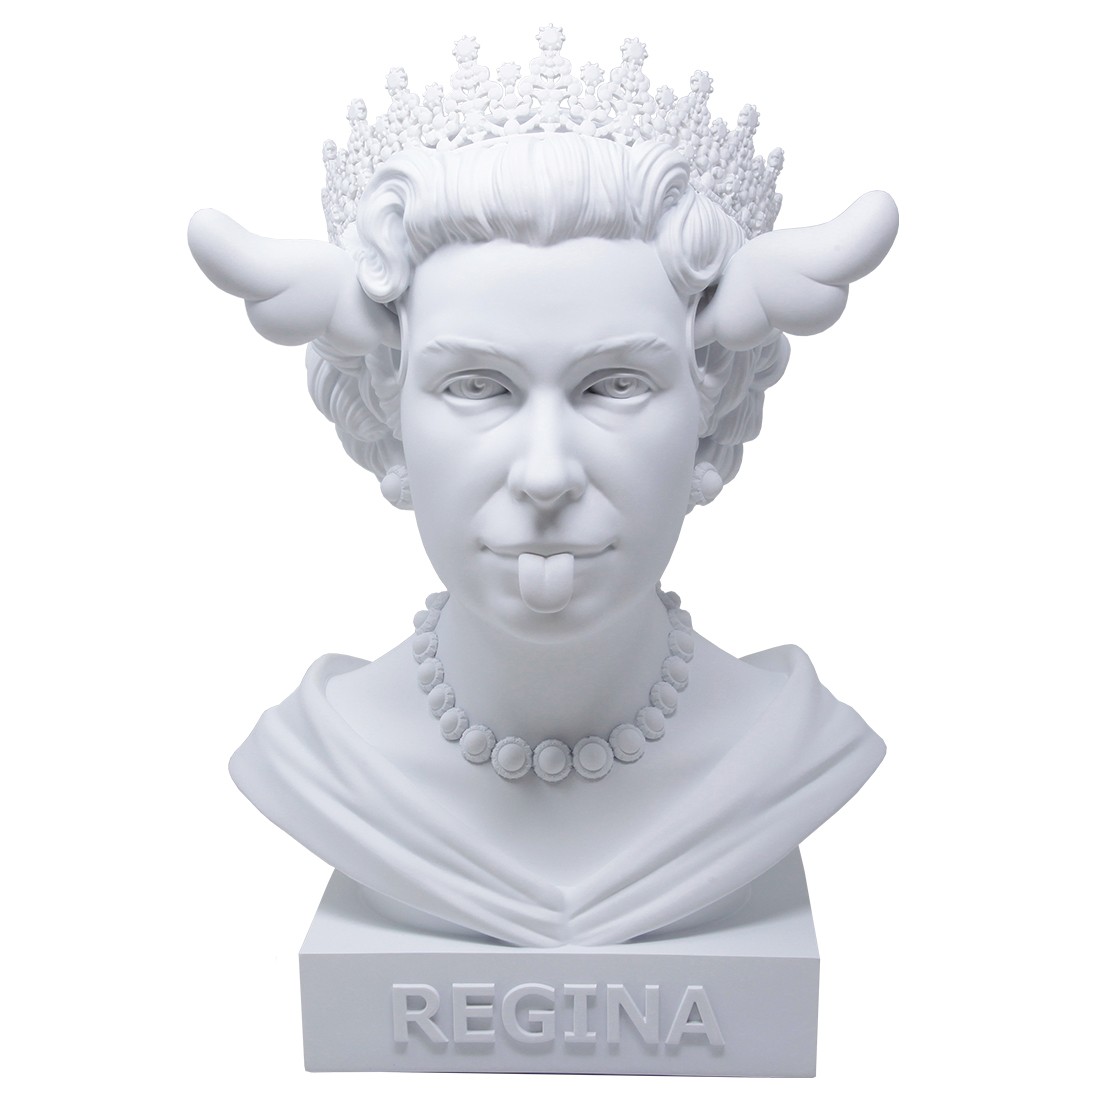 Medicom x SYNC x D*Face Dog Save The Queen Statue (white)